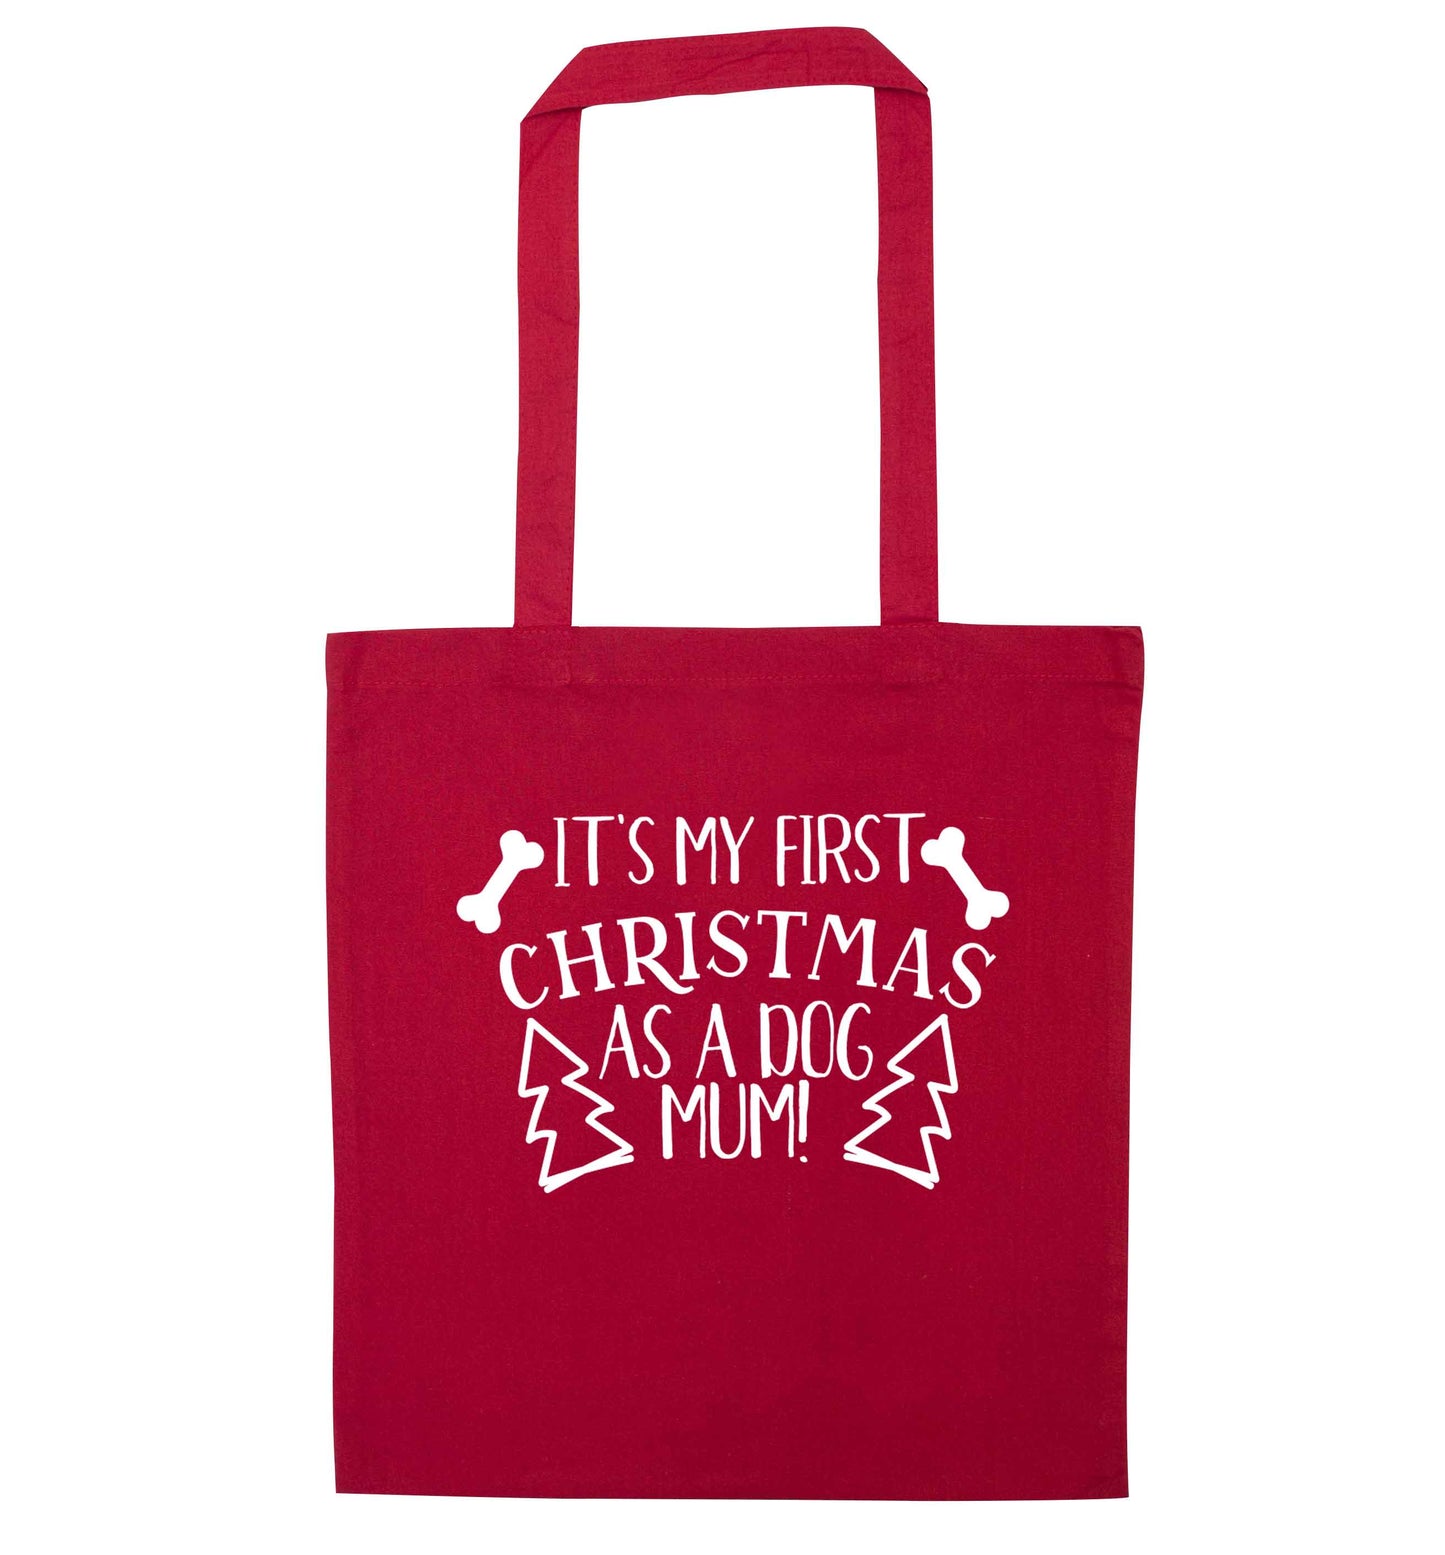 It's my first Christmas as a dog mum! red tote bag